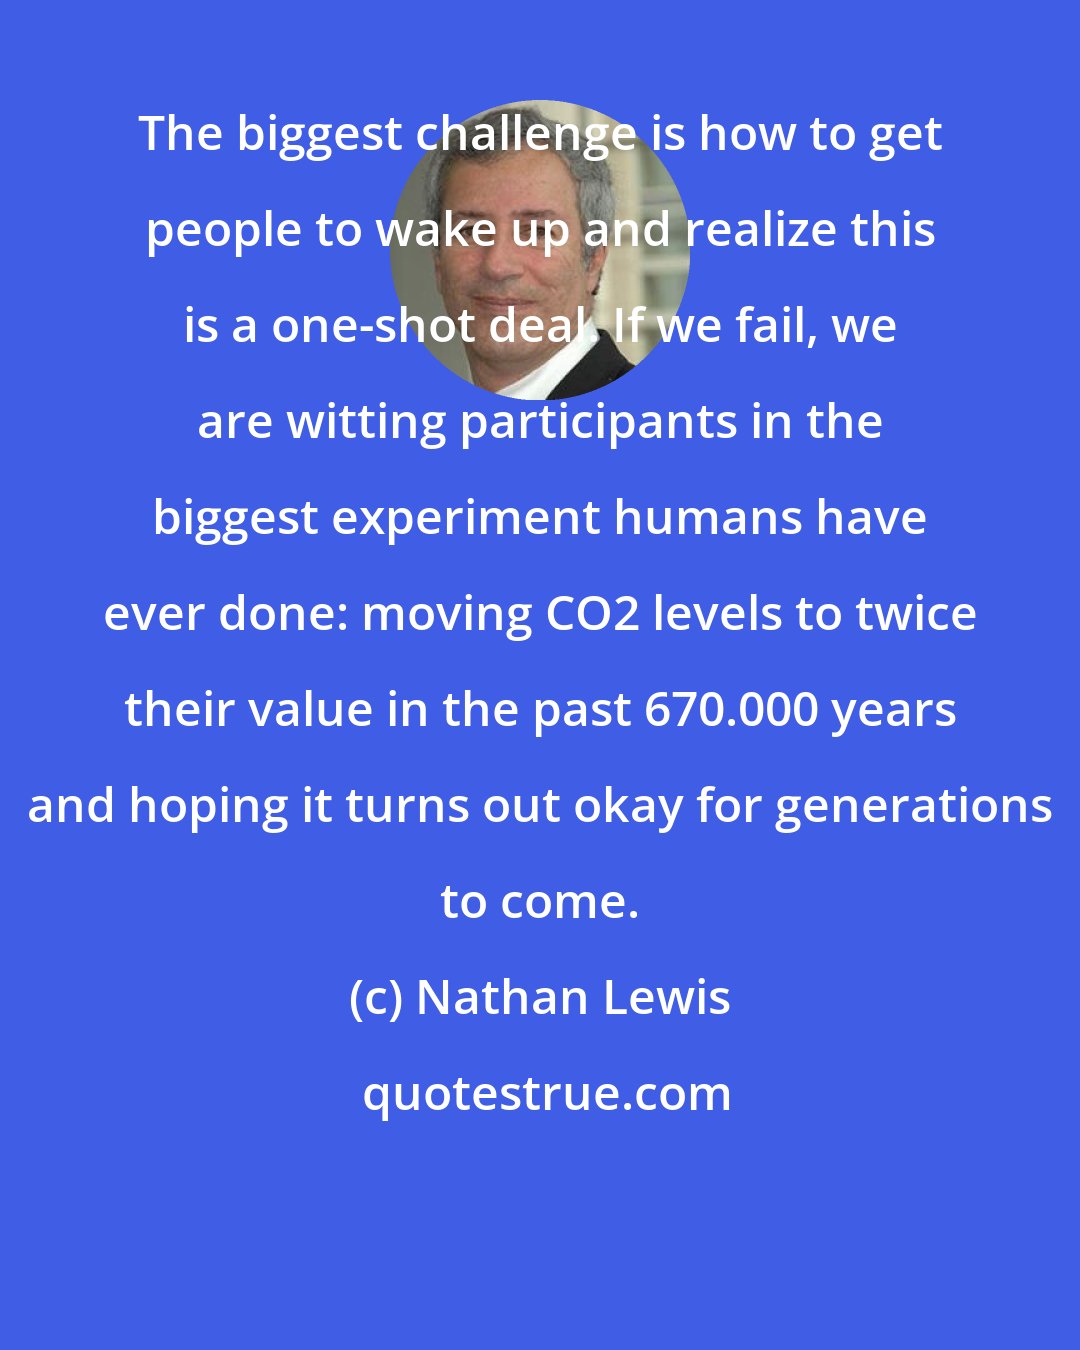 Nathan Lewis: The biggest challenge is how to get people to wake up and realize this is a one-shot deal. If we fail, we are witting participants in the biggest experiment humans have ever done: moving CO2 levels to twice their value in the past 670.000 years and hoping it turns out okay for generations to come.